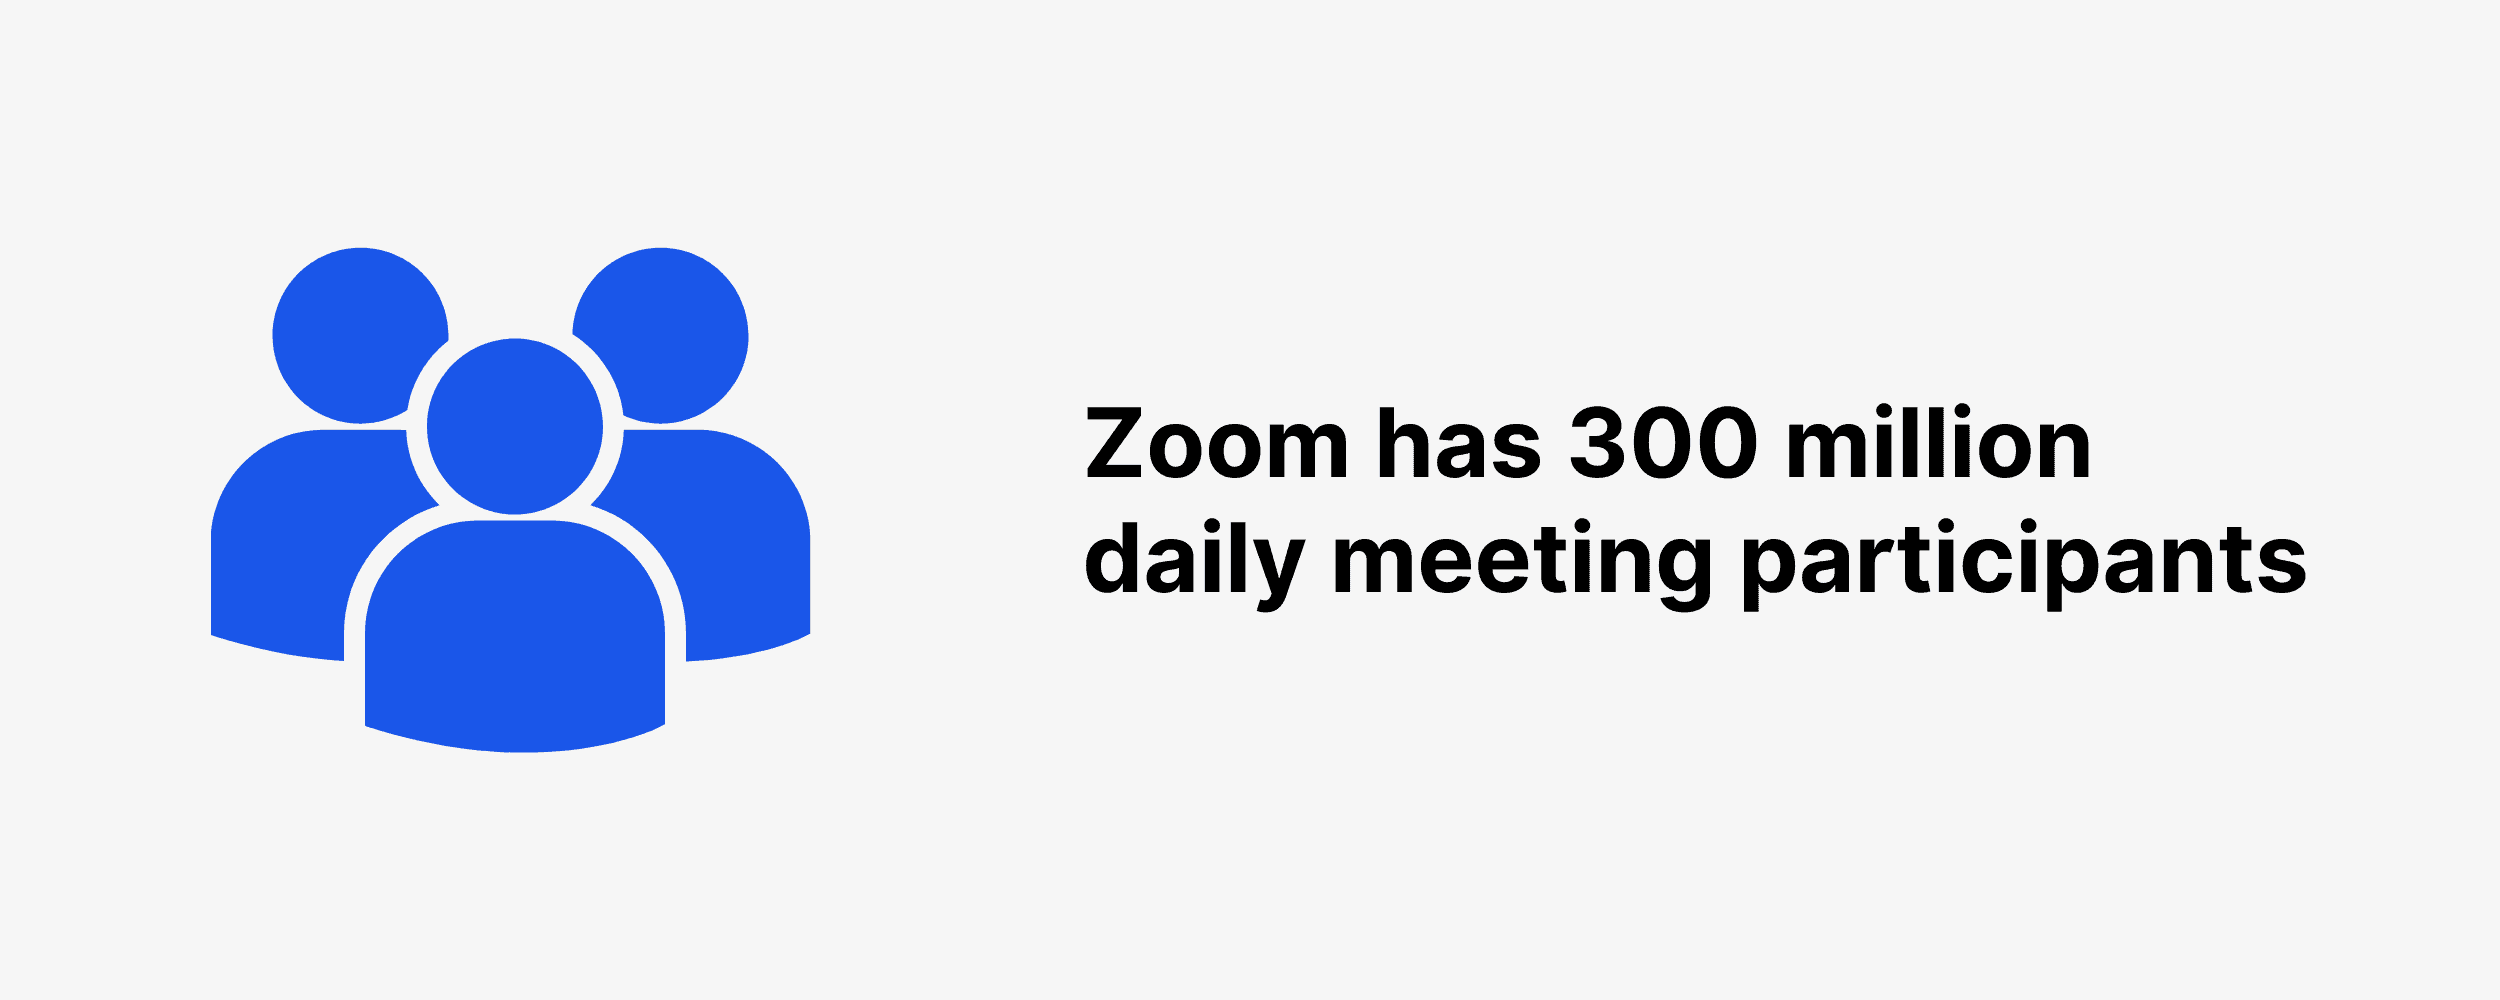 Zoom has 300 million daily meeting participants